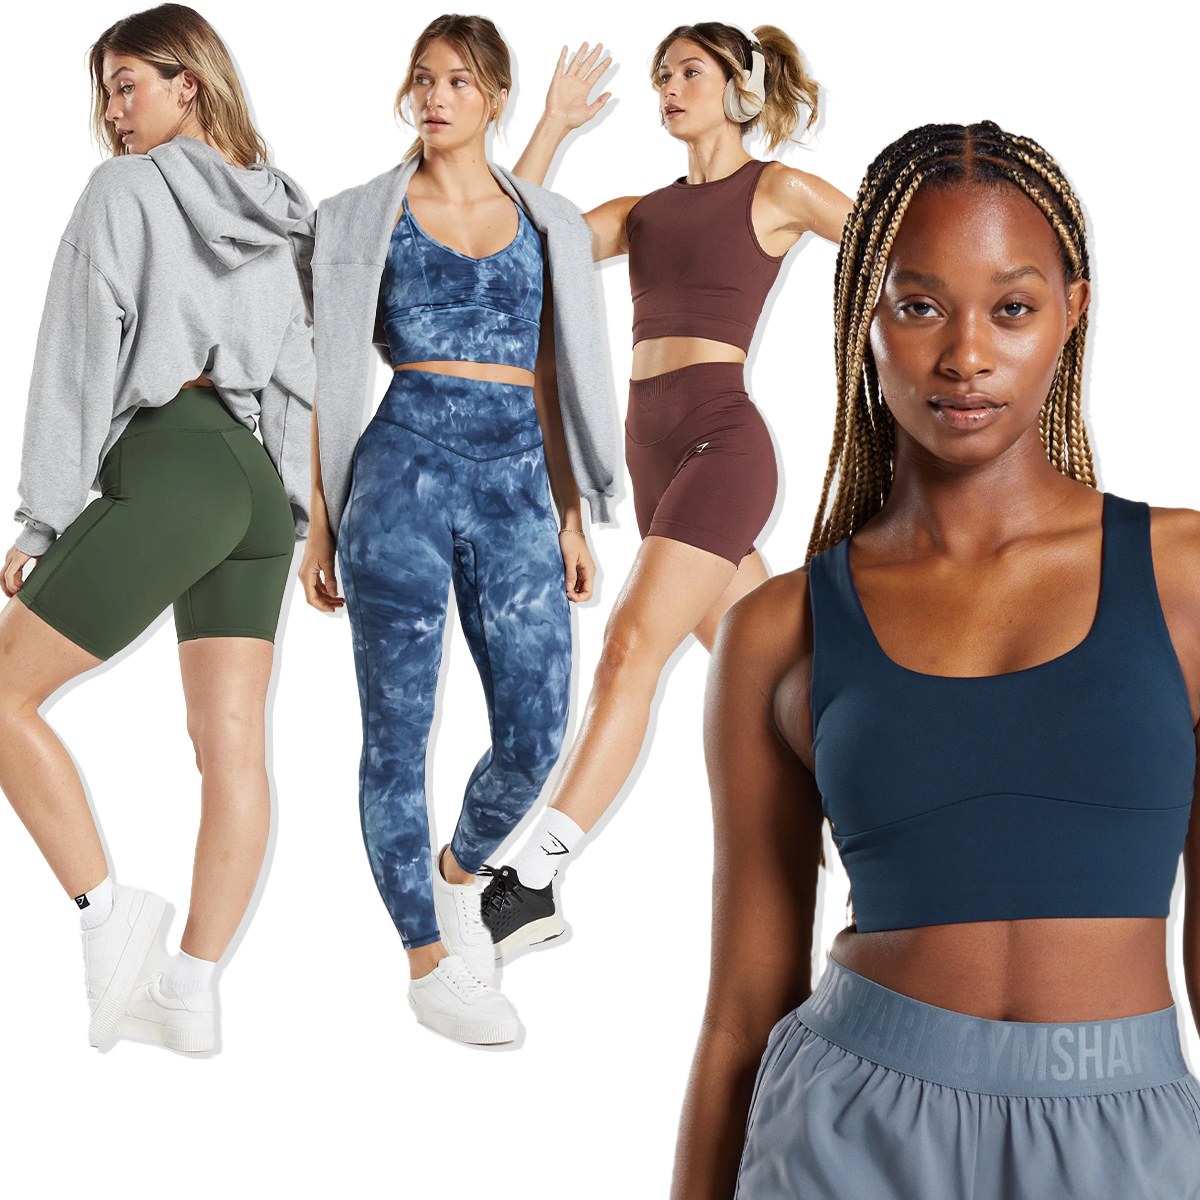 Gymshark's Spring Clearance Styles Include $15 Sports Bras, $22